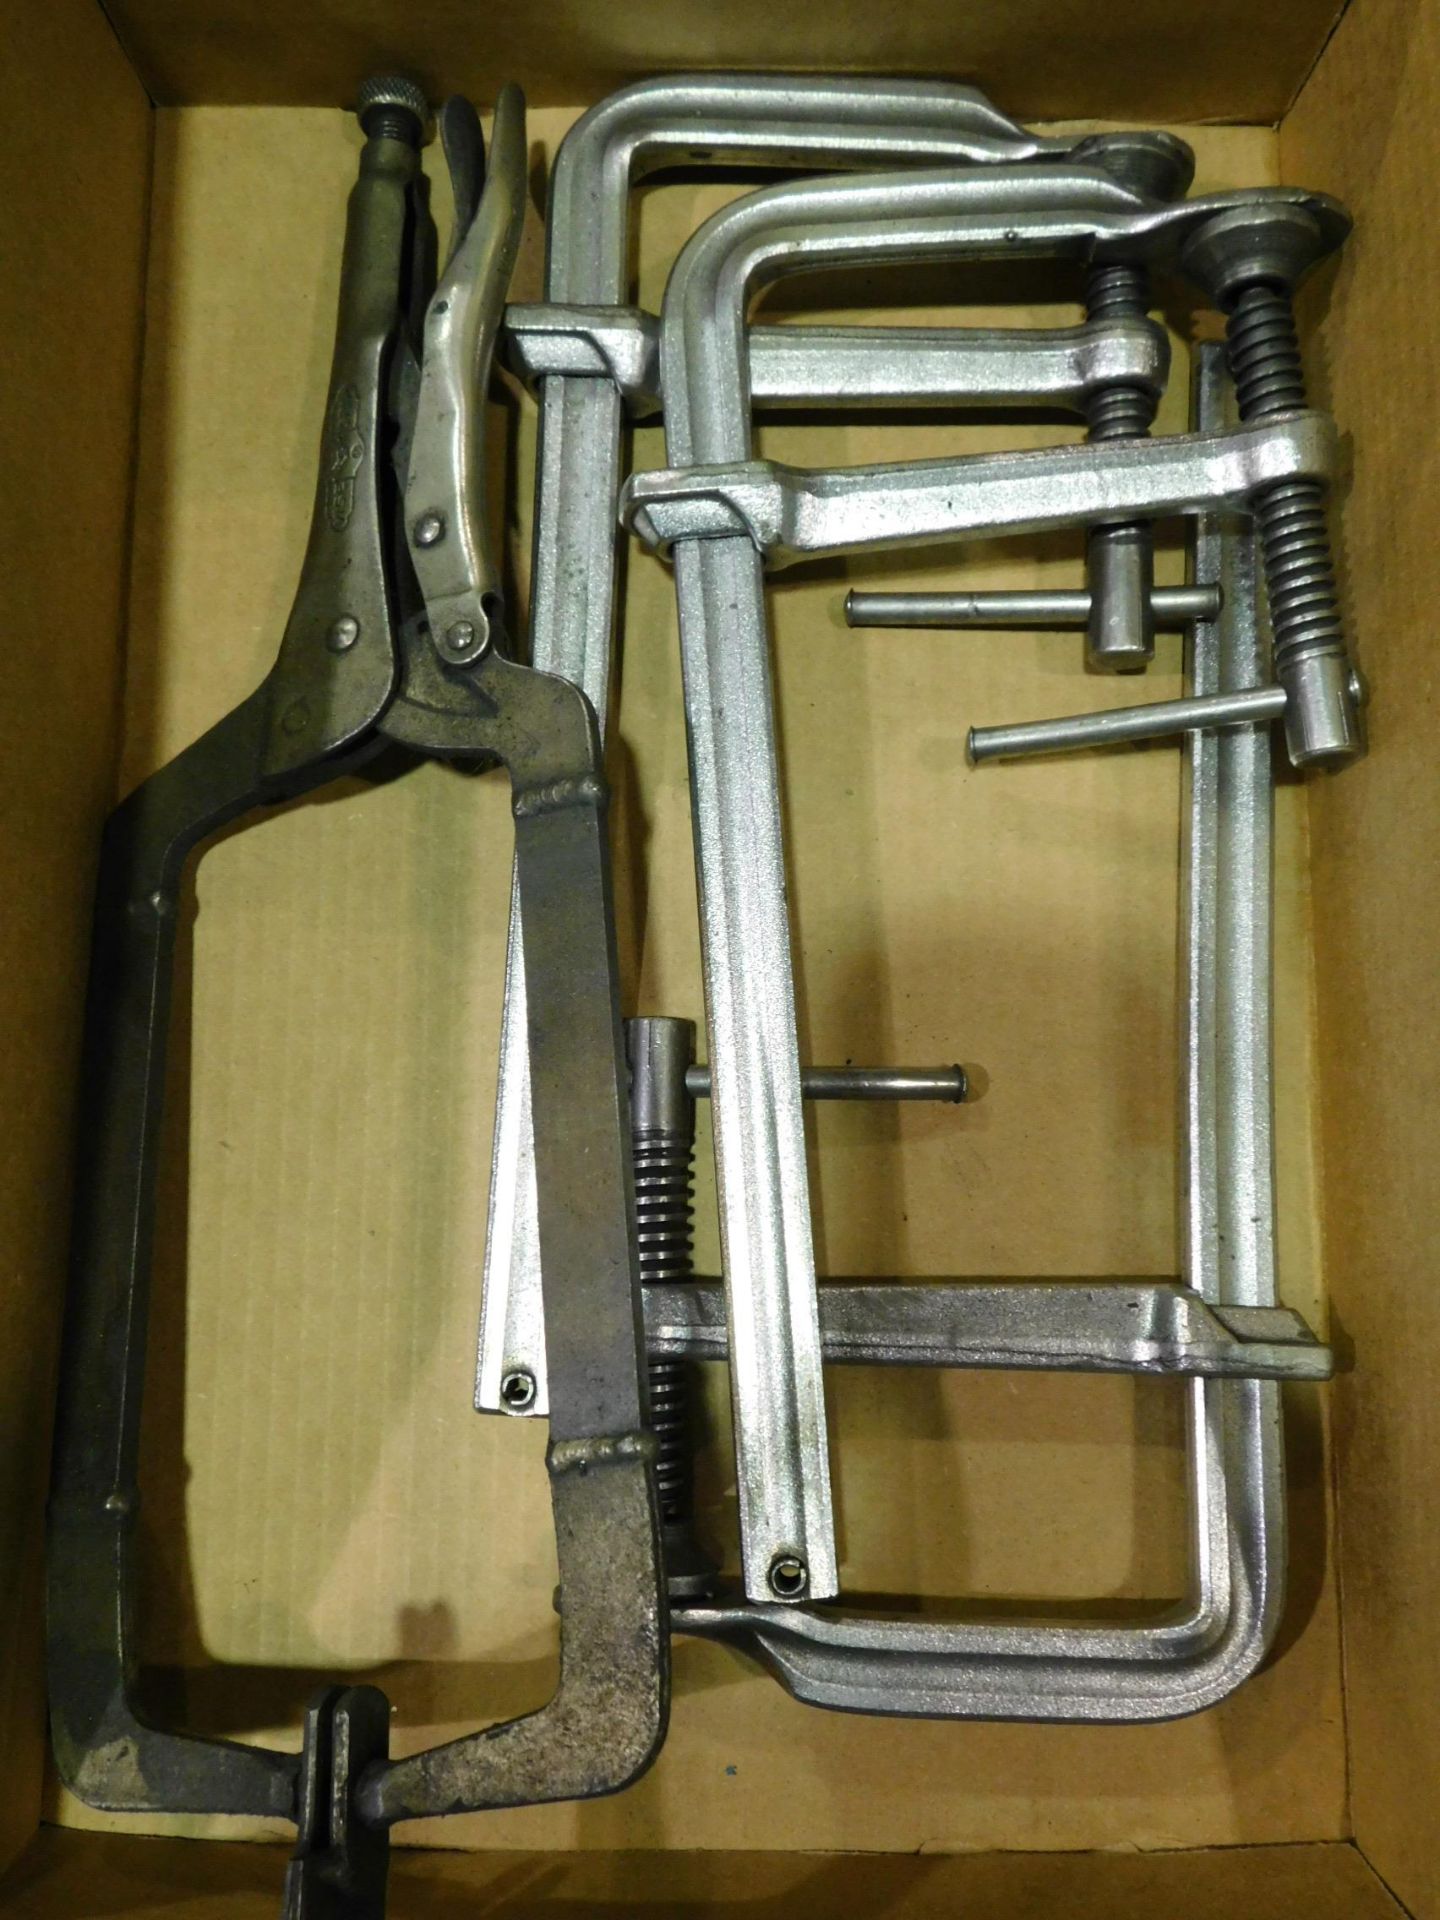 Vise Grip and Bar Clamps